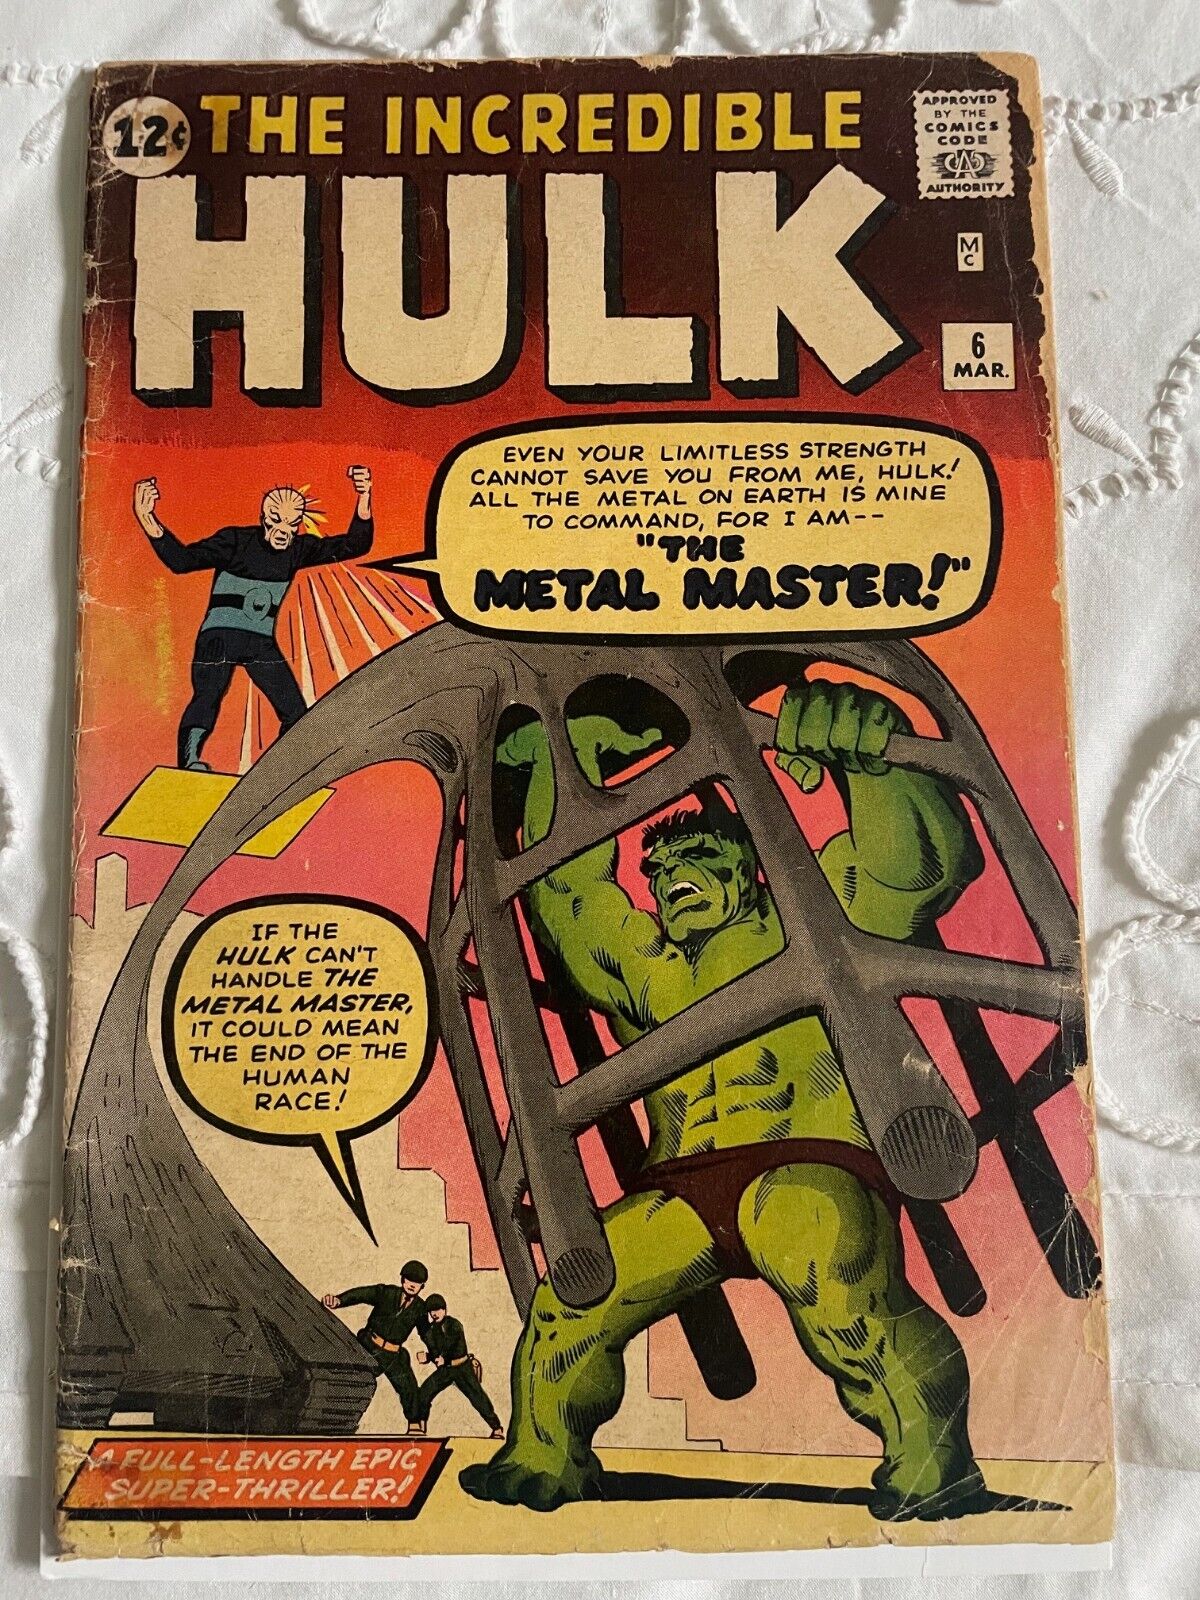 The Incredible Hulk #6 March 1963  1st app Teen Brigade, Last Issue